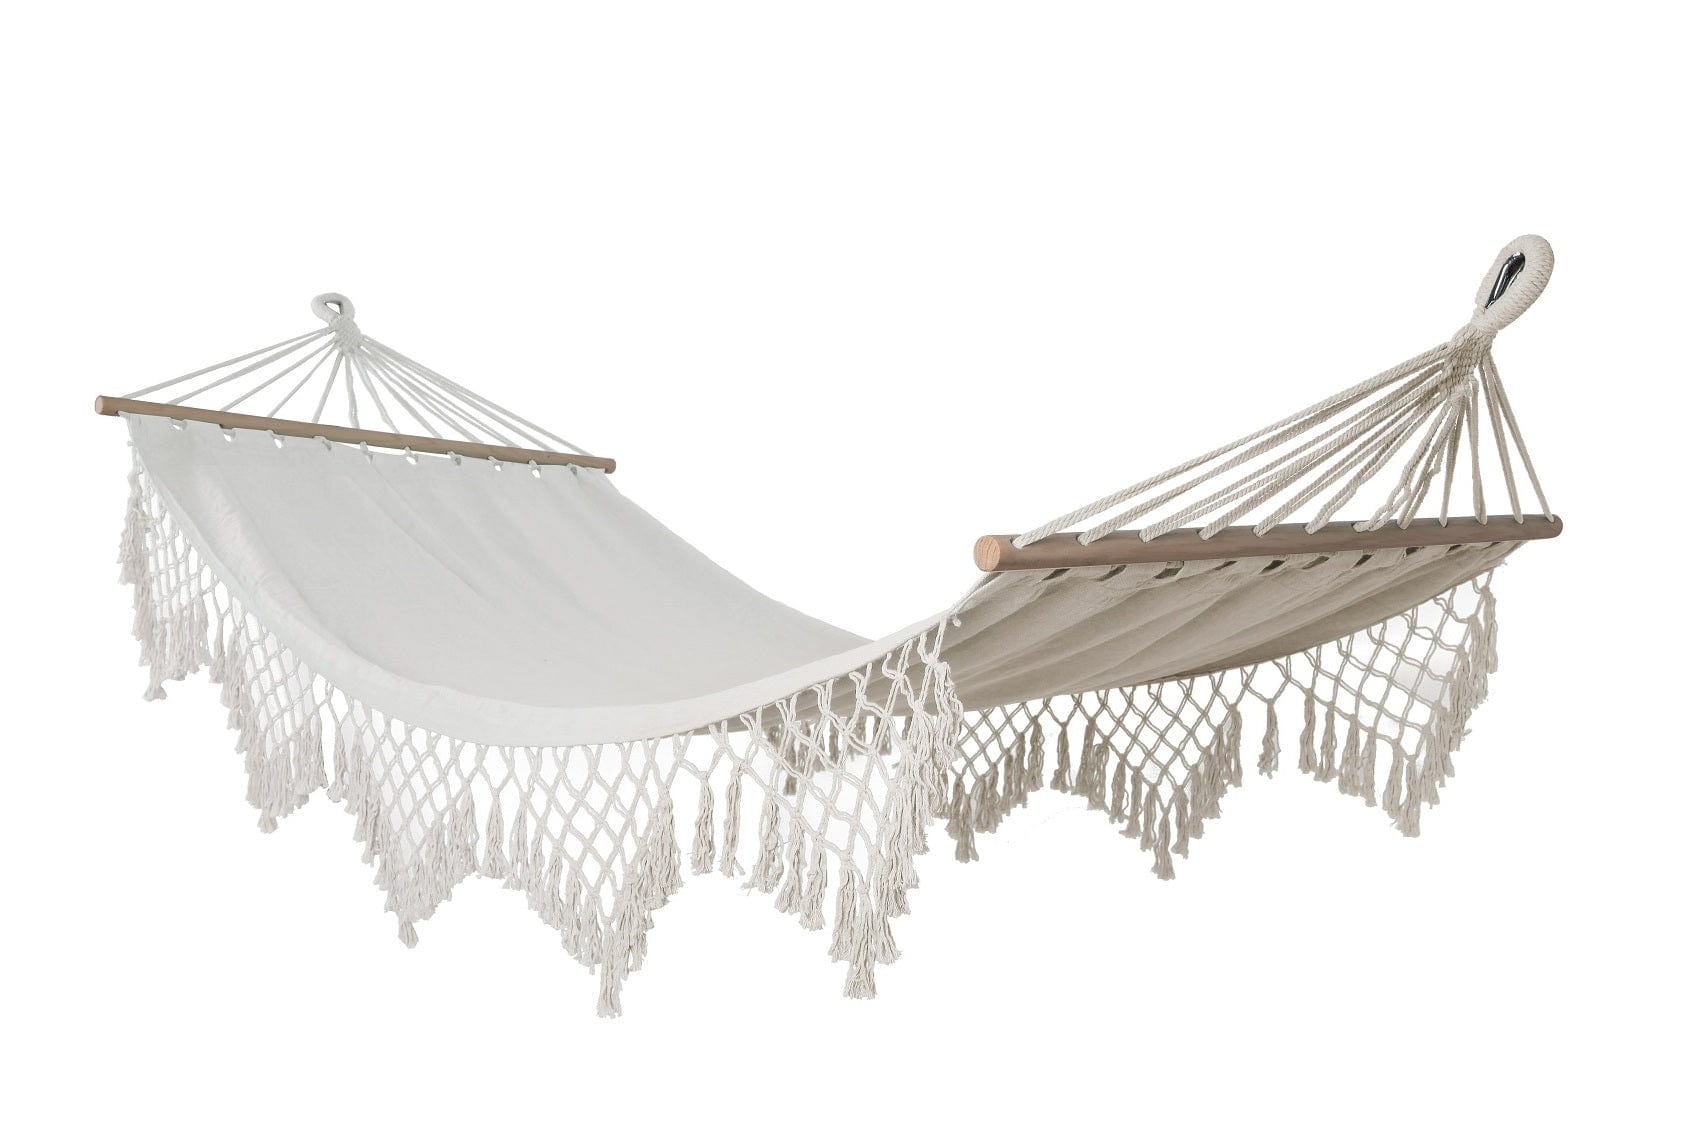 Natural Sling Hammock With Decorative Fringes and Spreader Bars, Weight capacity 115Kg- 90W X 335L cm Long